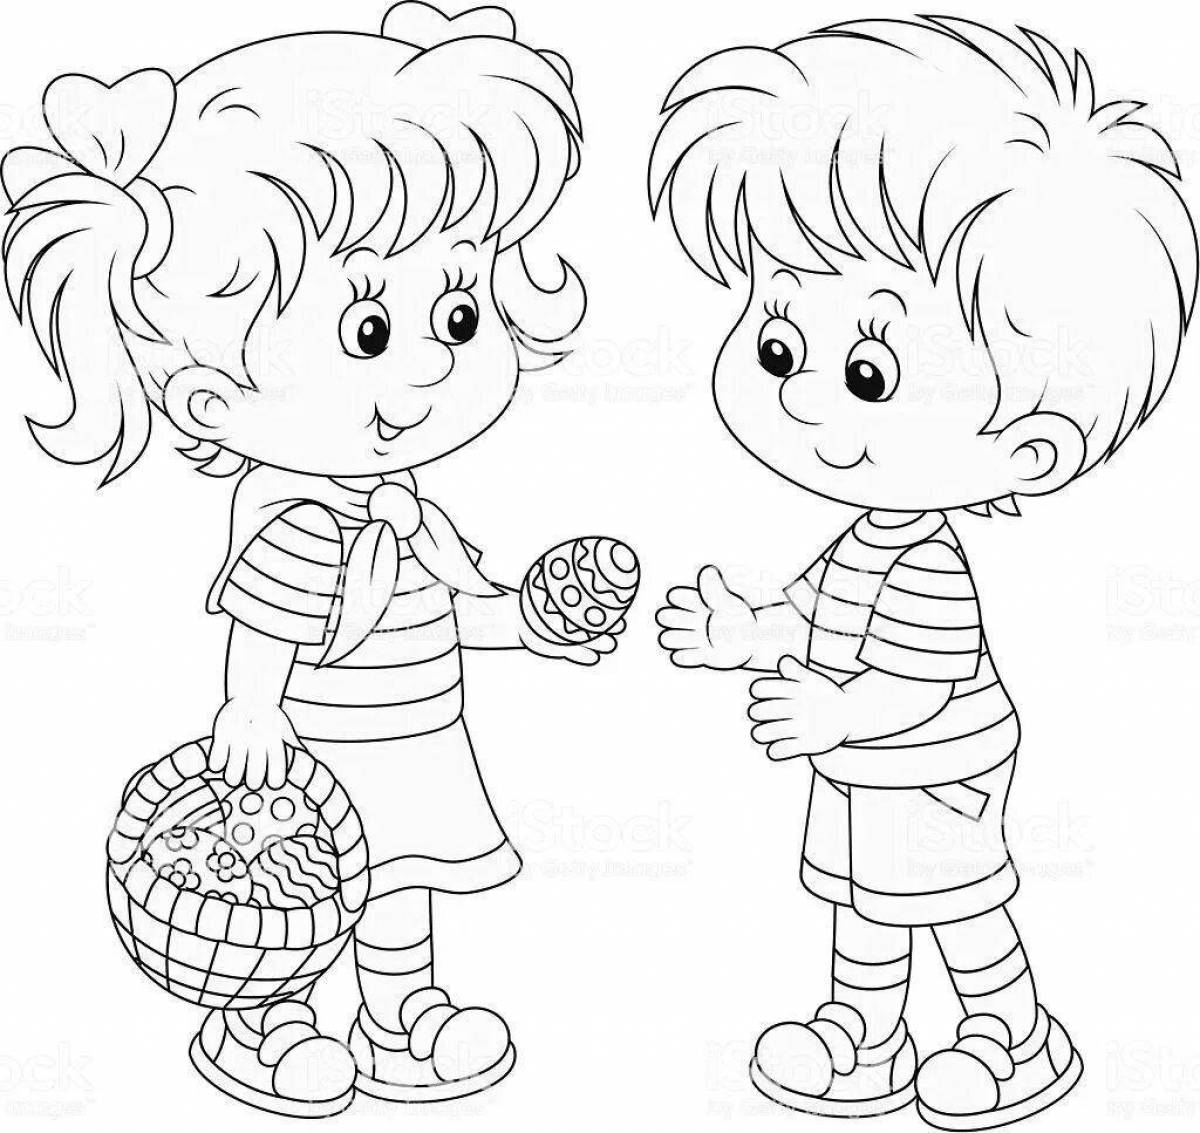 Funny friendship coloring for preschoolers